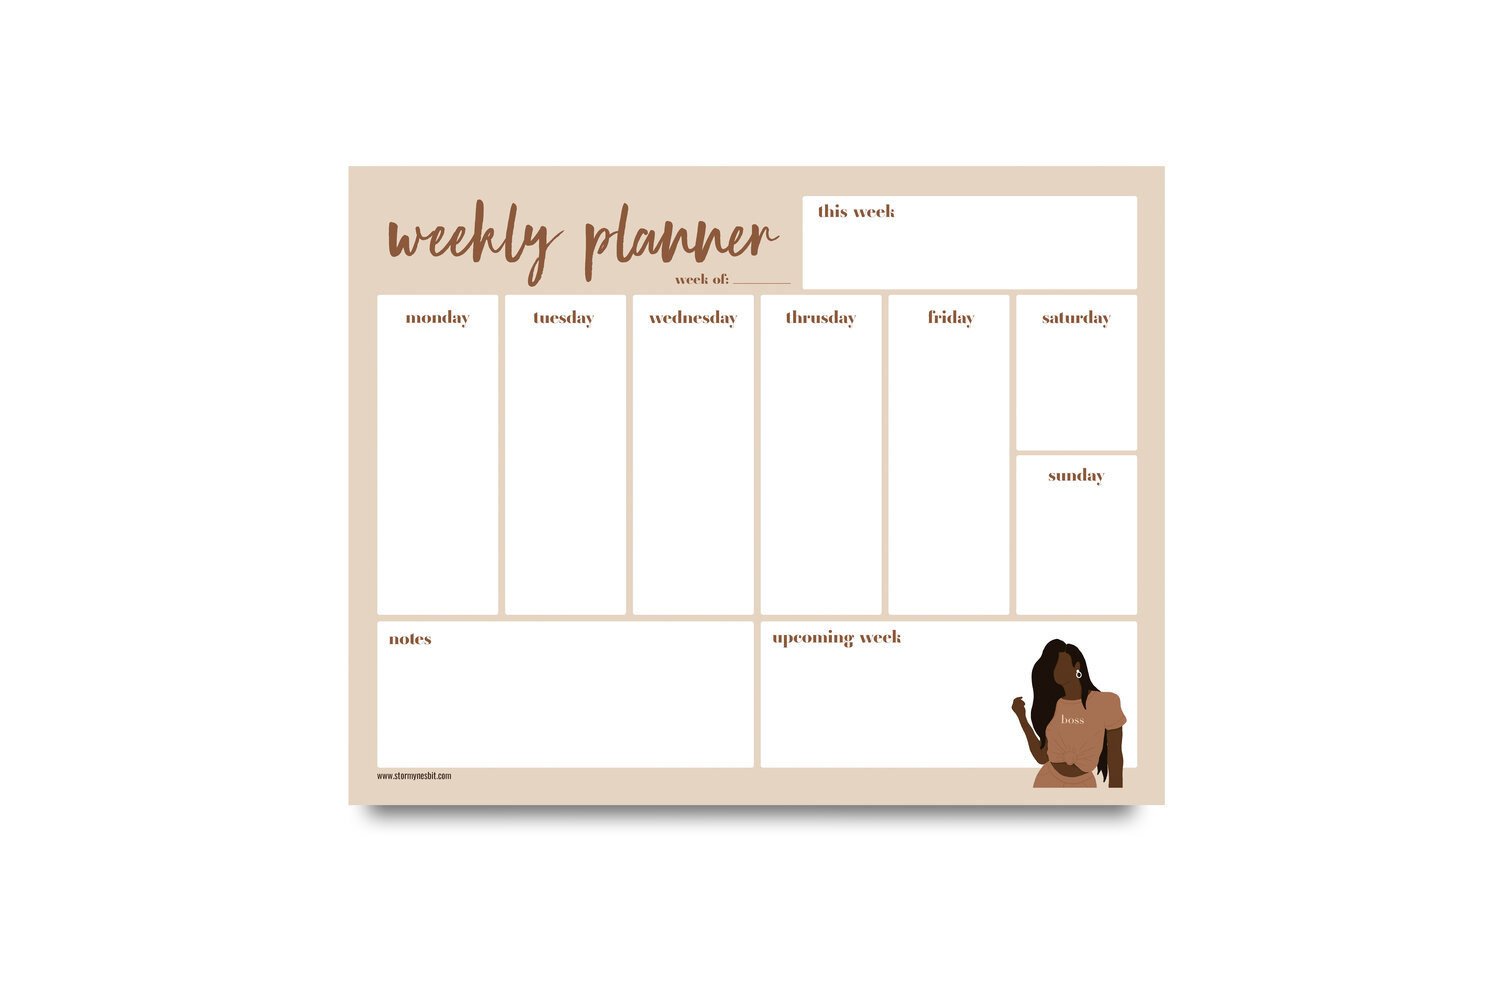 ,that girl Weekly planner fot